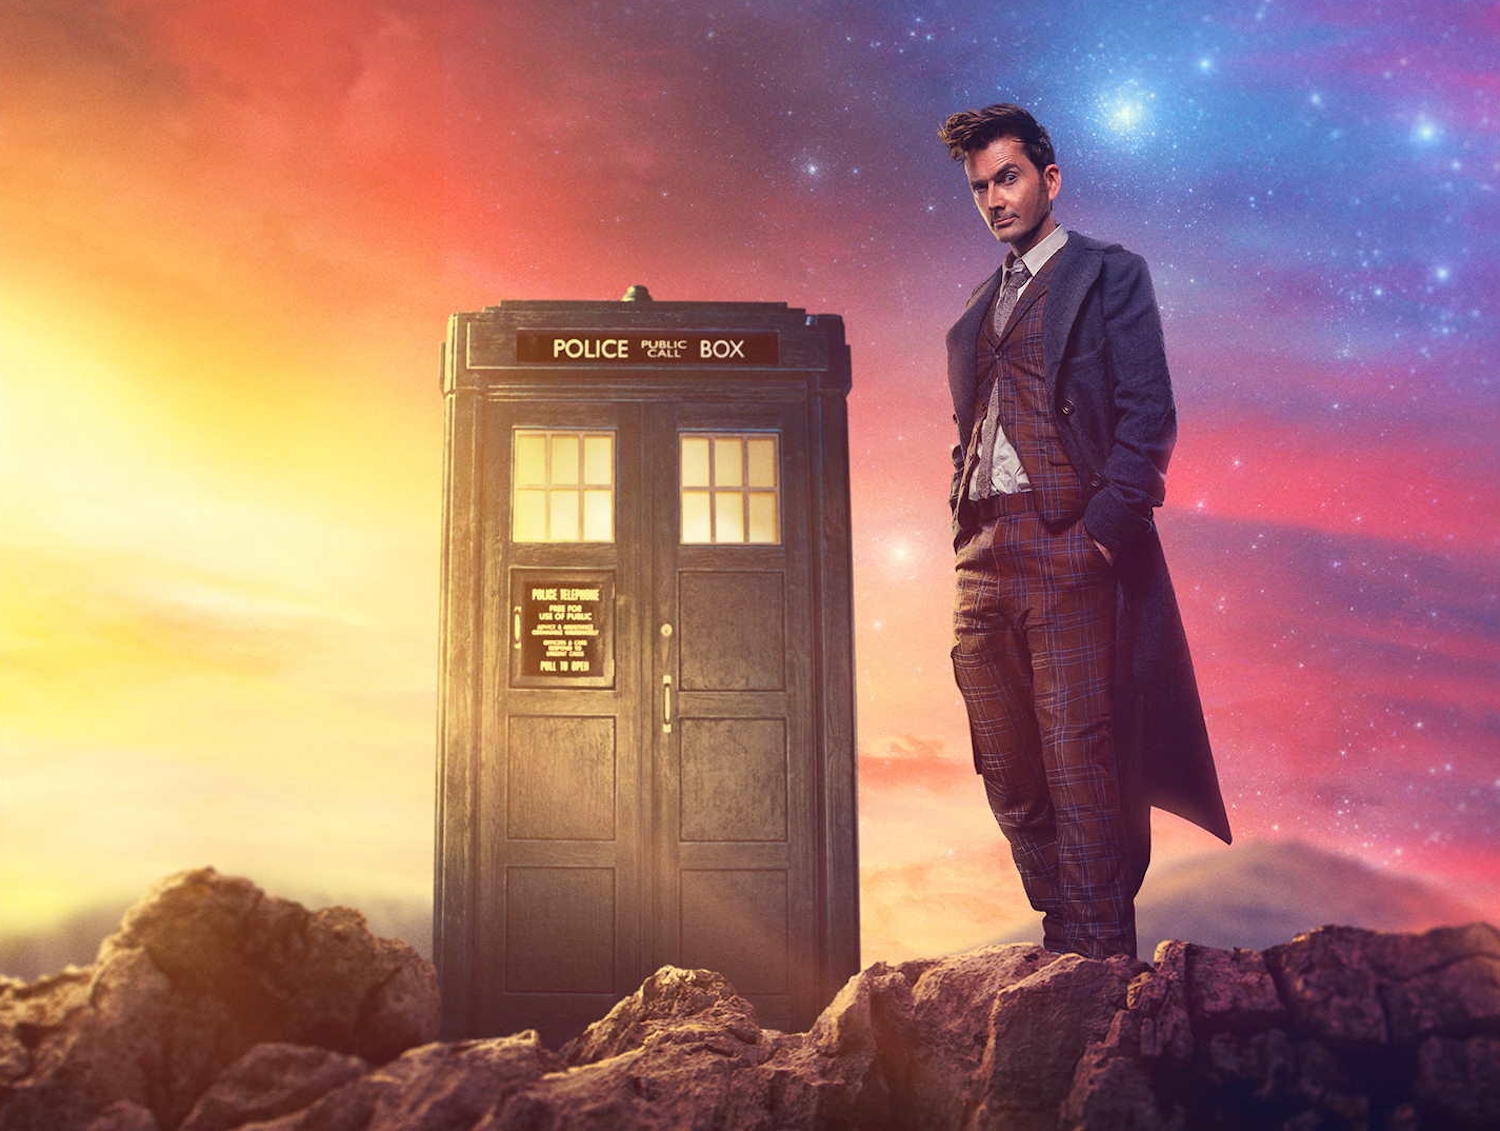 Doctor Who' Specials 2023: David Tennant Makes Us Excited for the Future